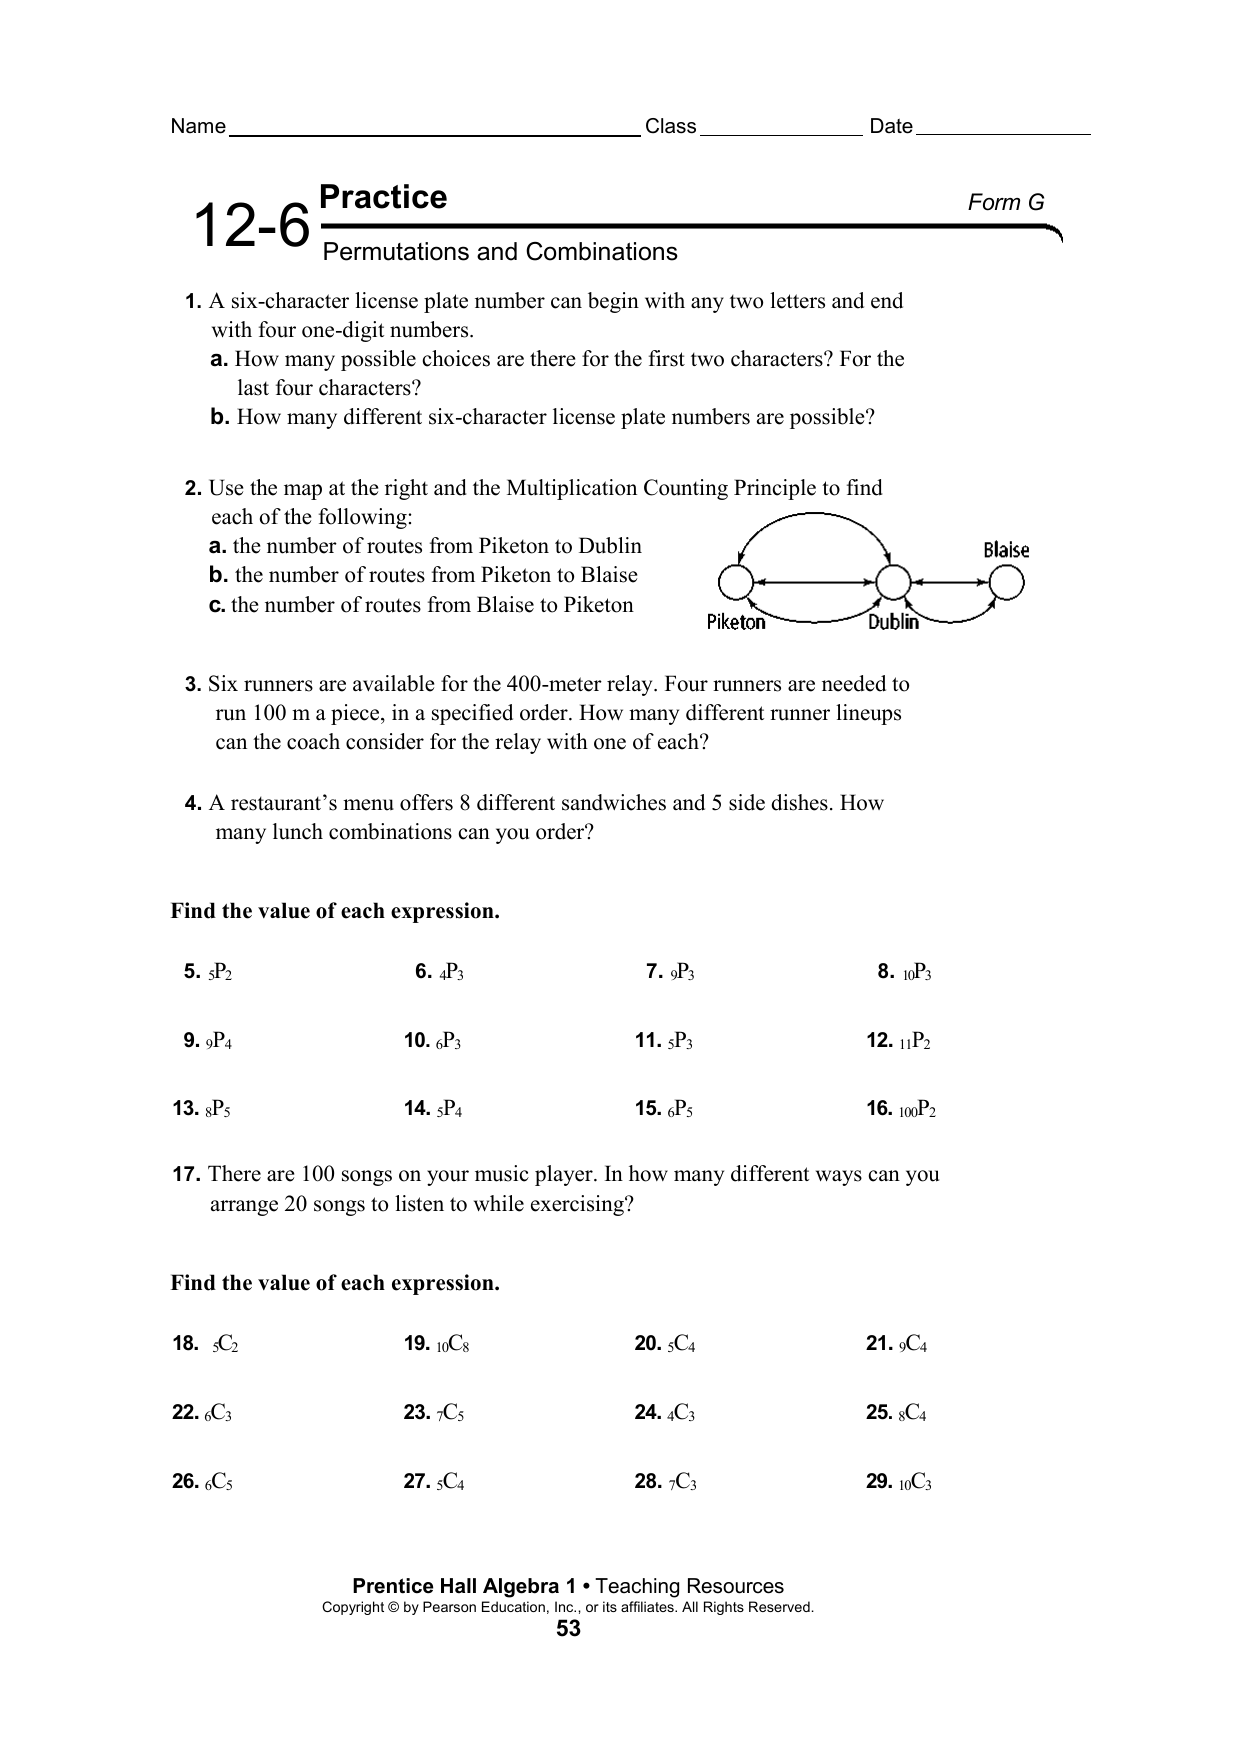 permutations-and-combinations-worksheet-with-answers-doc